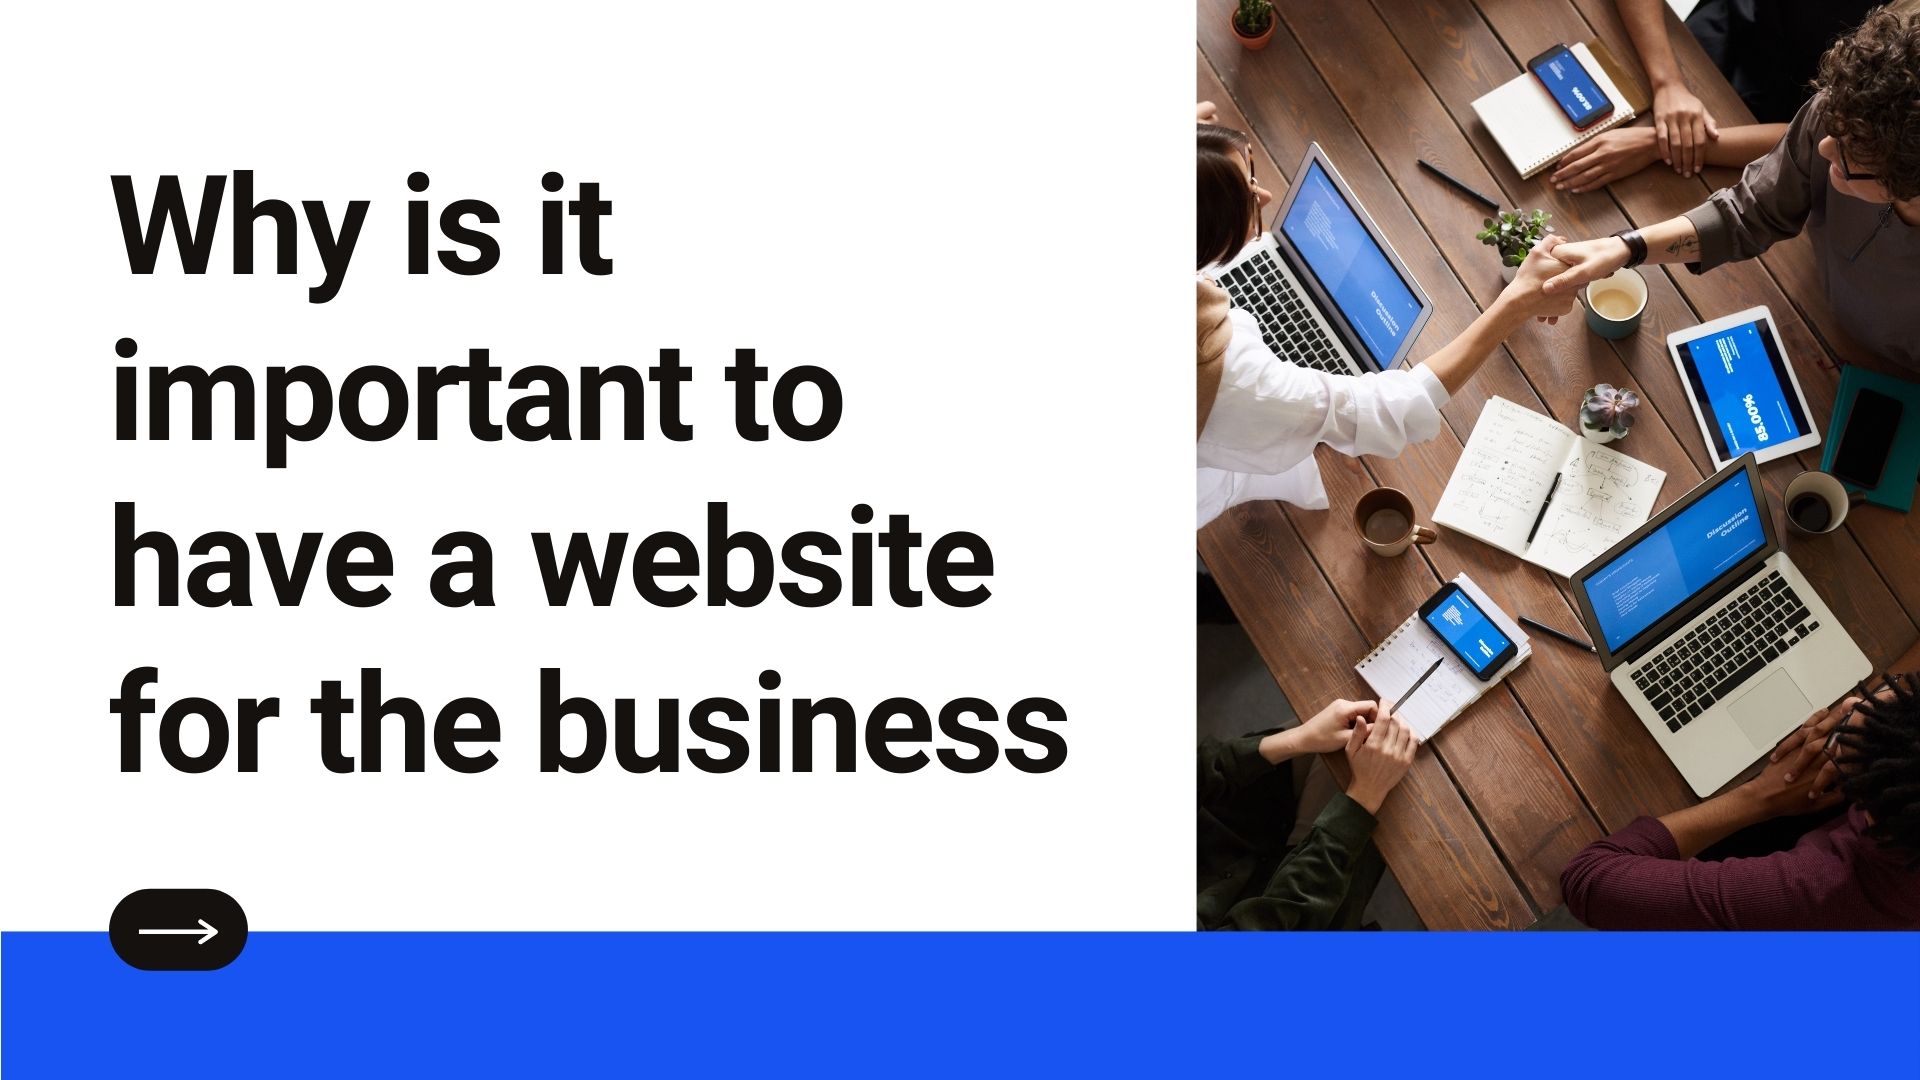 Why is it important to have a website for the business?